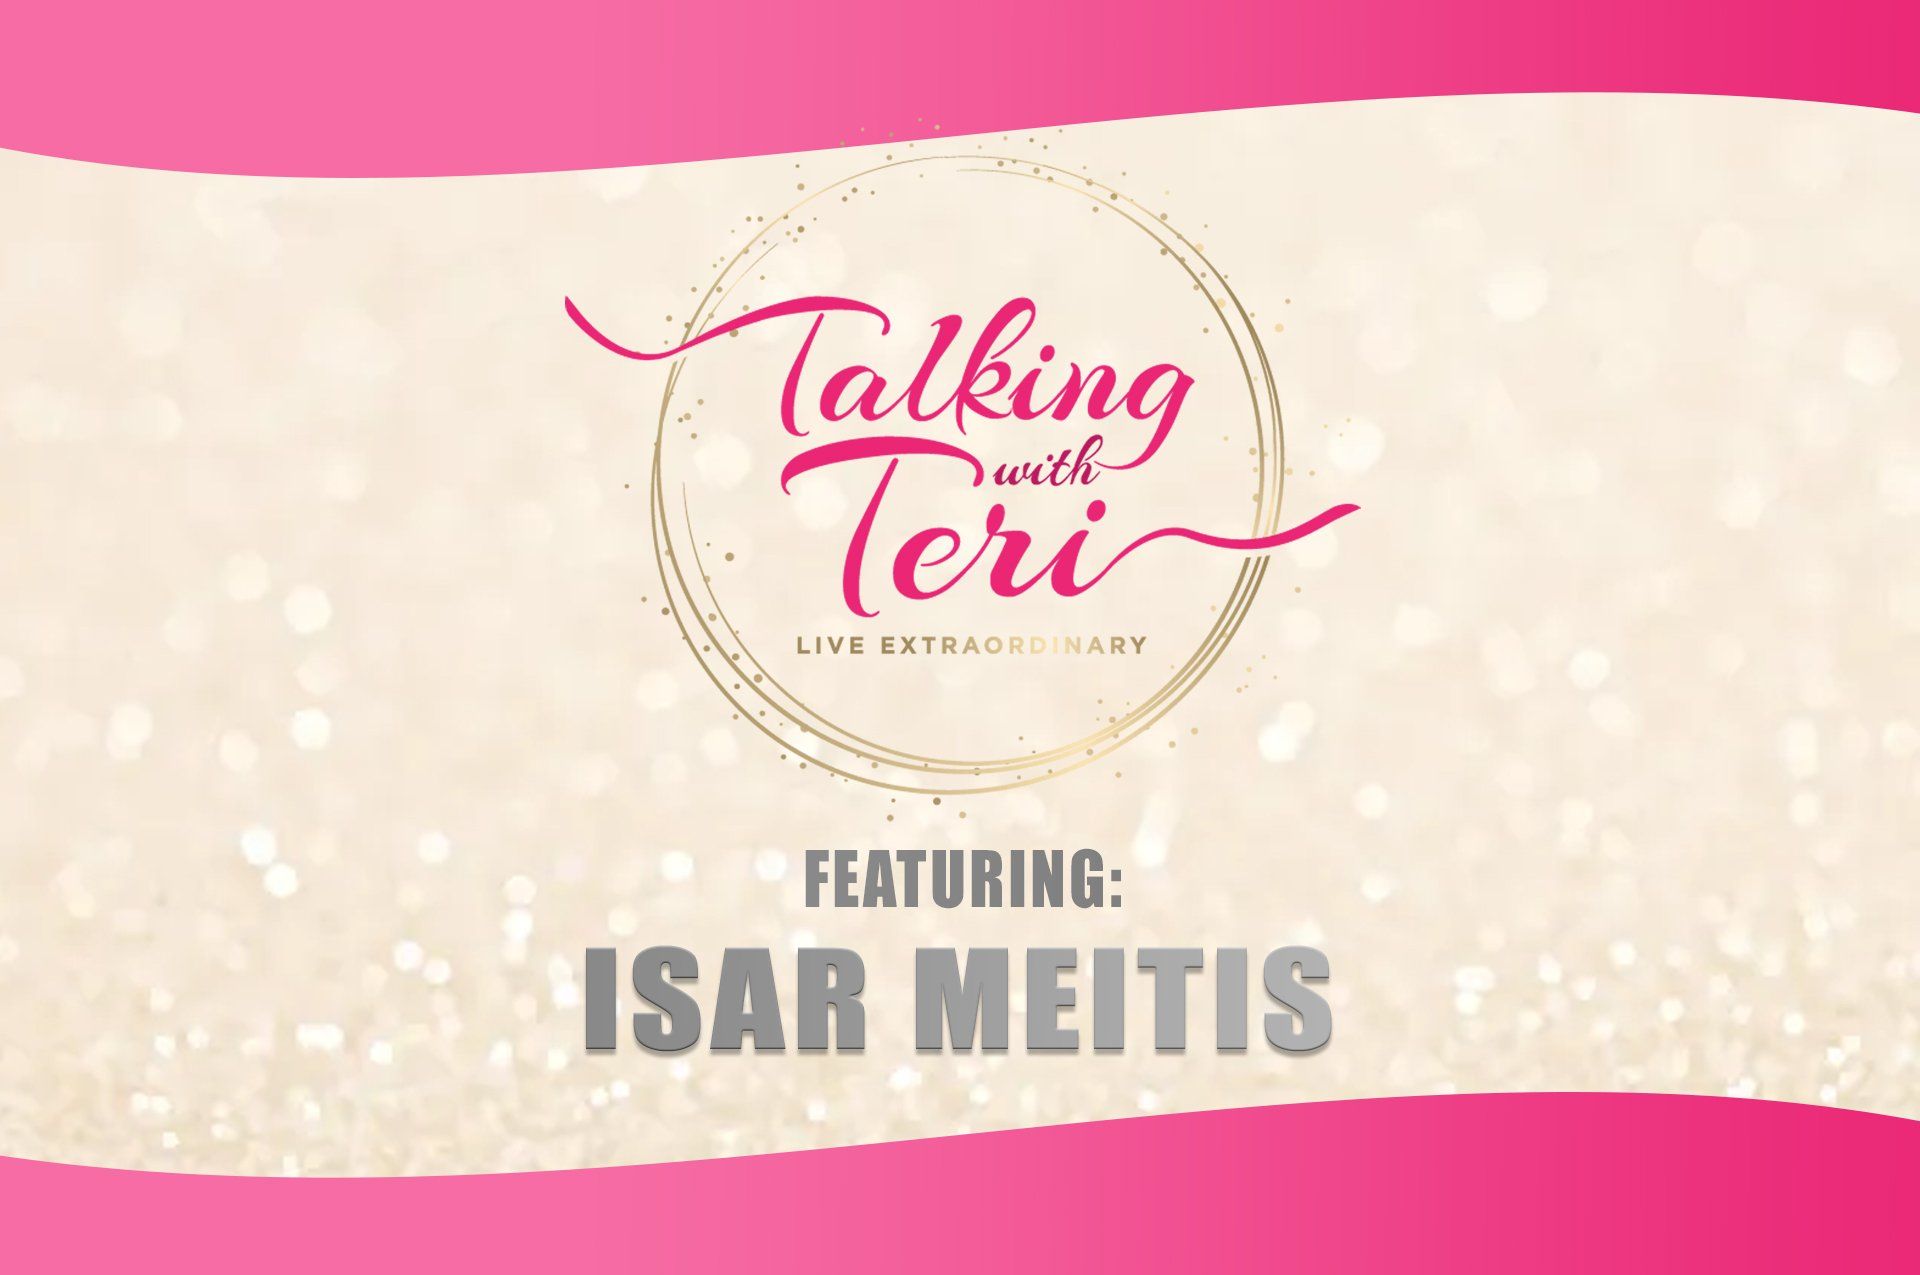 Talking With Teri and Isar Meitis